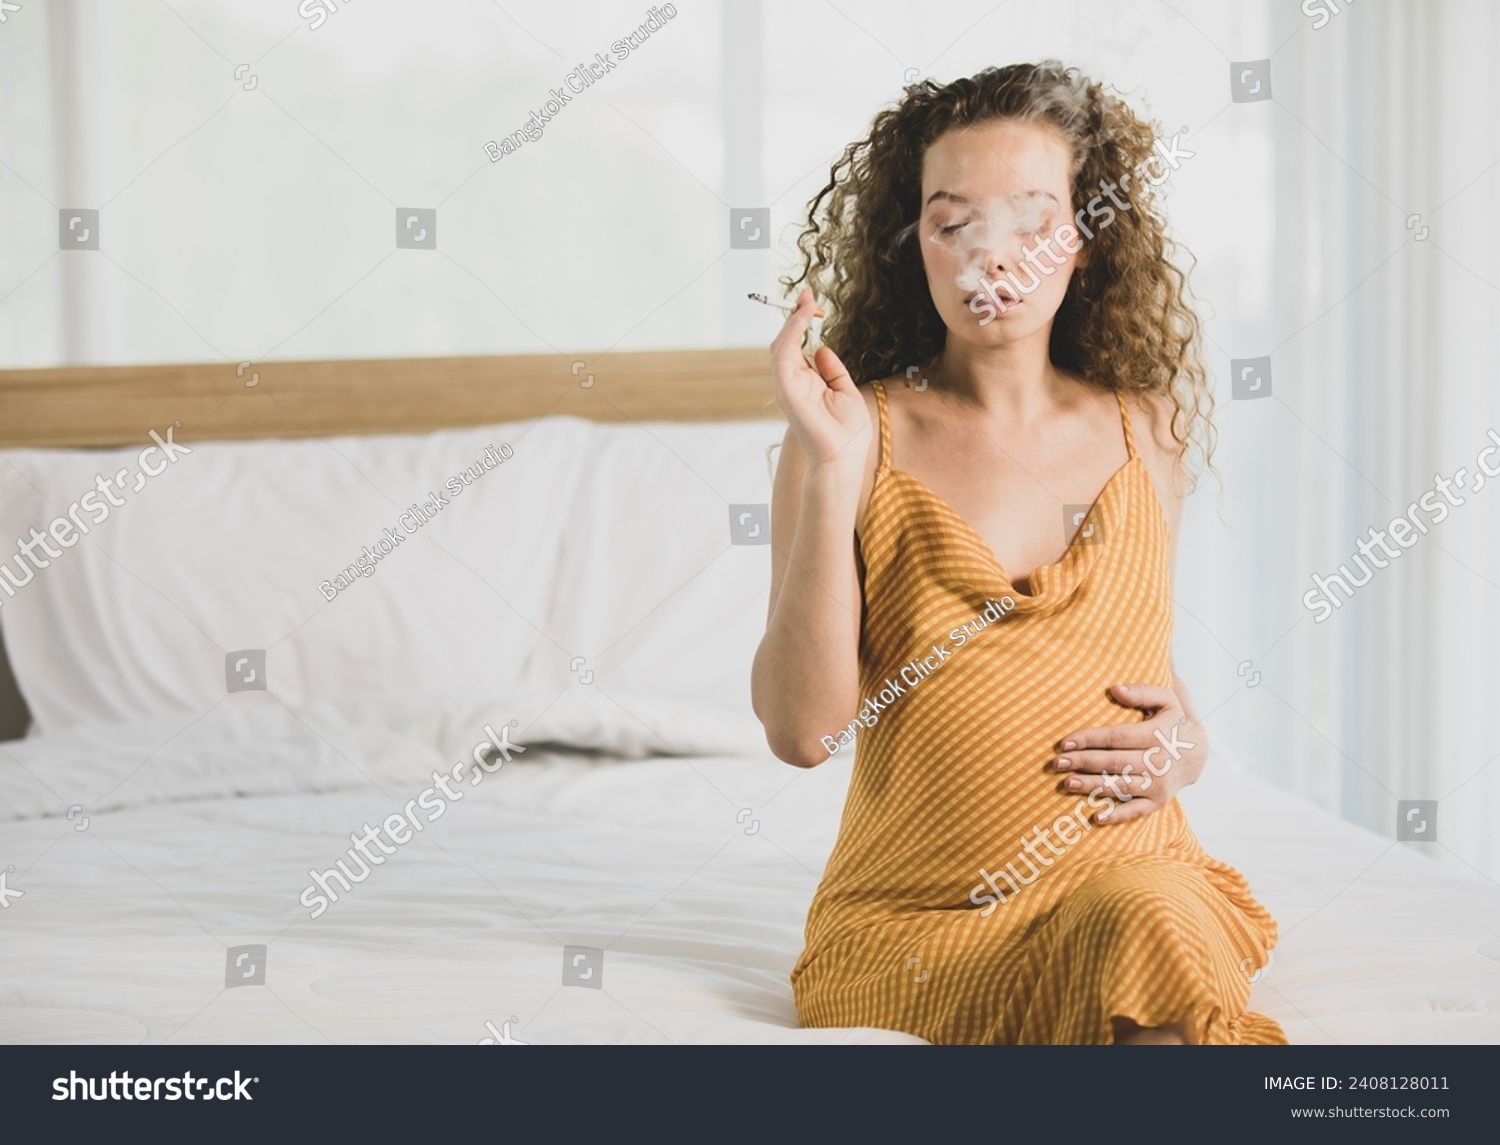 Curly hairstyle young unhappy unhealthy bad behavior Caucasian pregnancy mother in maternity long dress cloth sit on bed in bedroom holding smoking cigarette taking risk and danger to unborn child. #2408128011